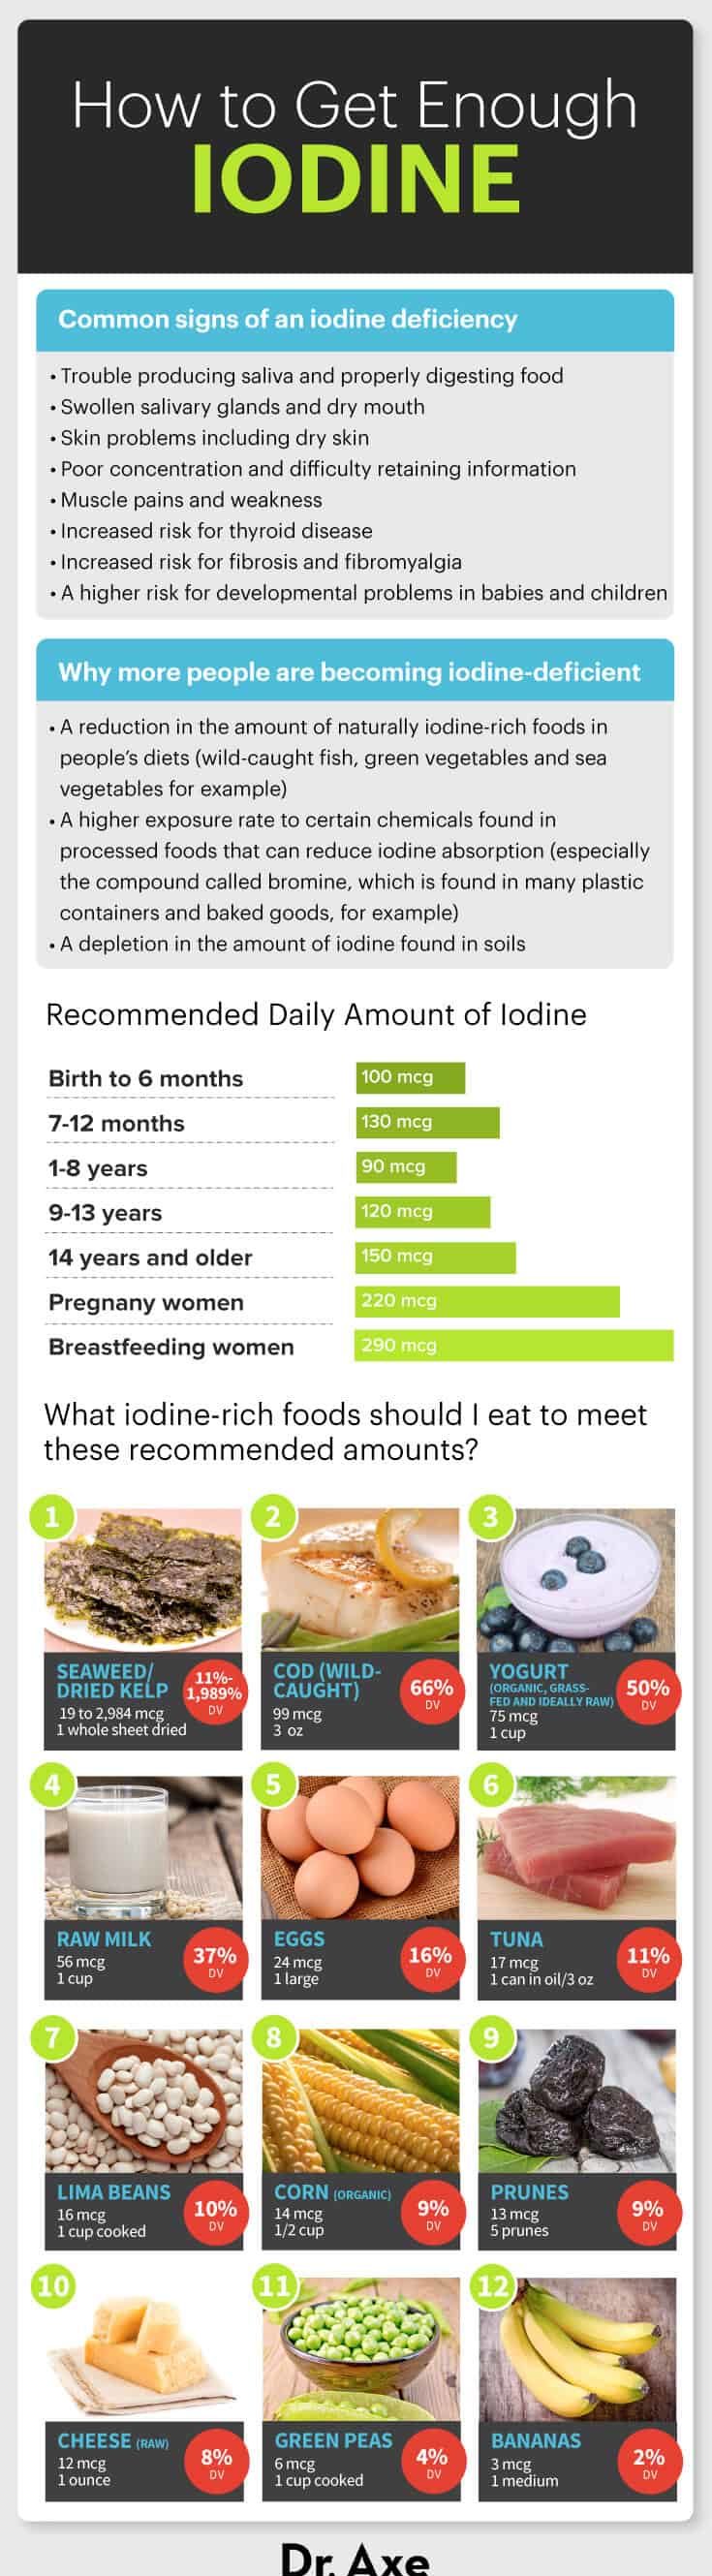 Top Iodine Rich Foods And Key Health Benefits They Provide Dr Axe